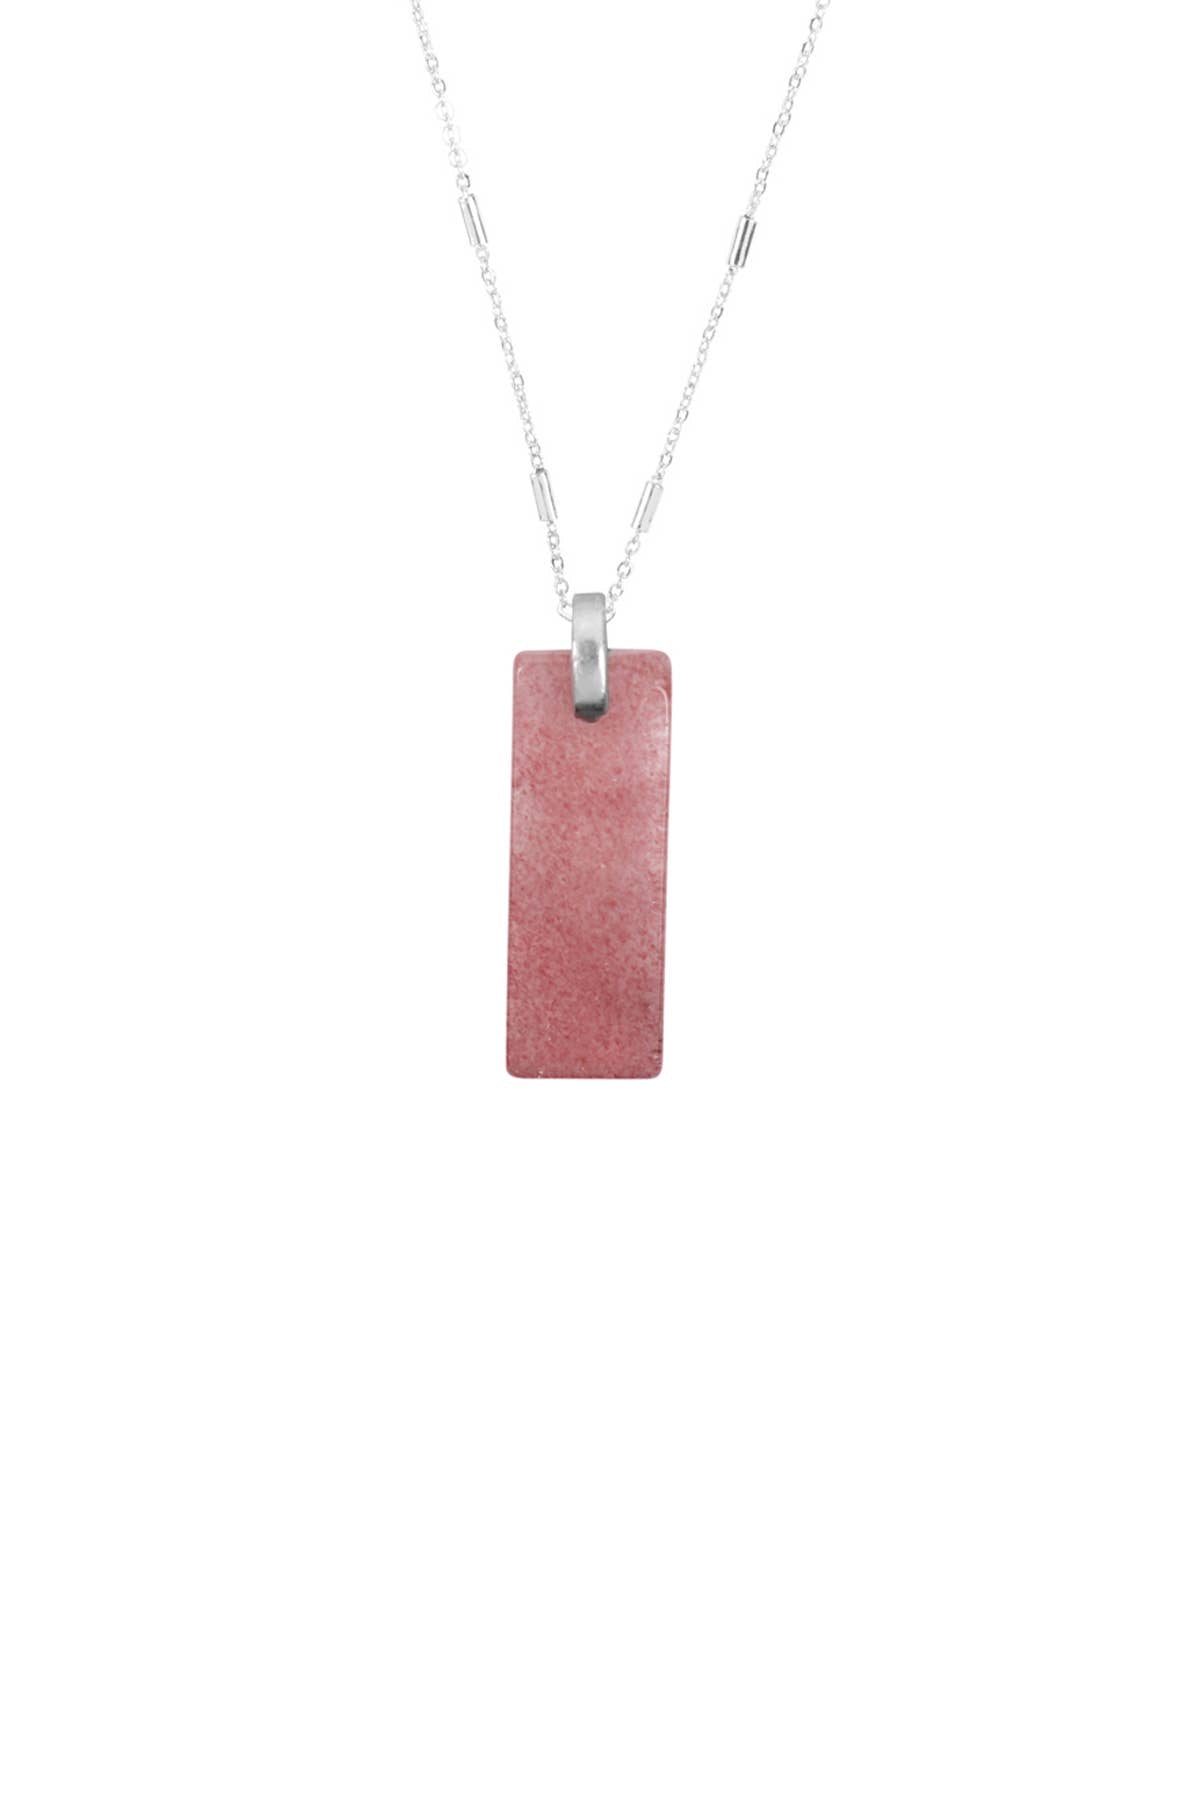 Two Layered Metal and Stone Pendants Necklace